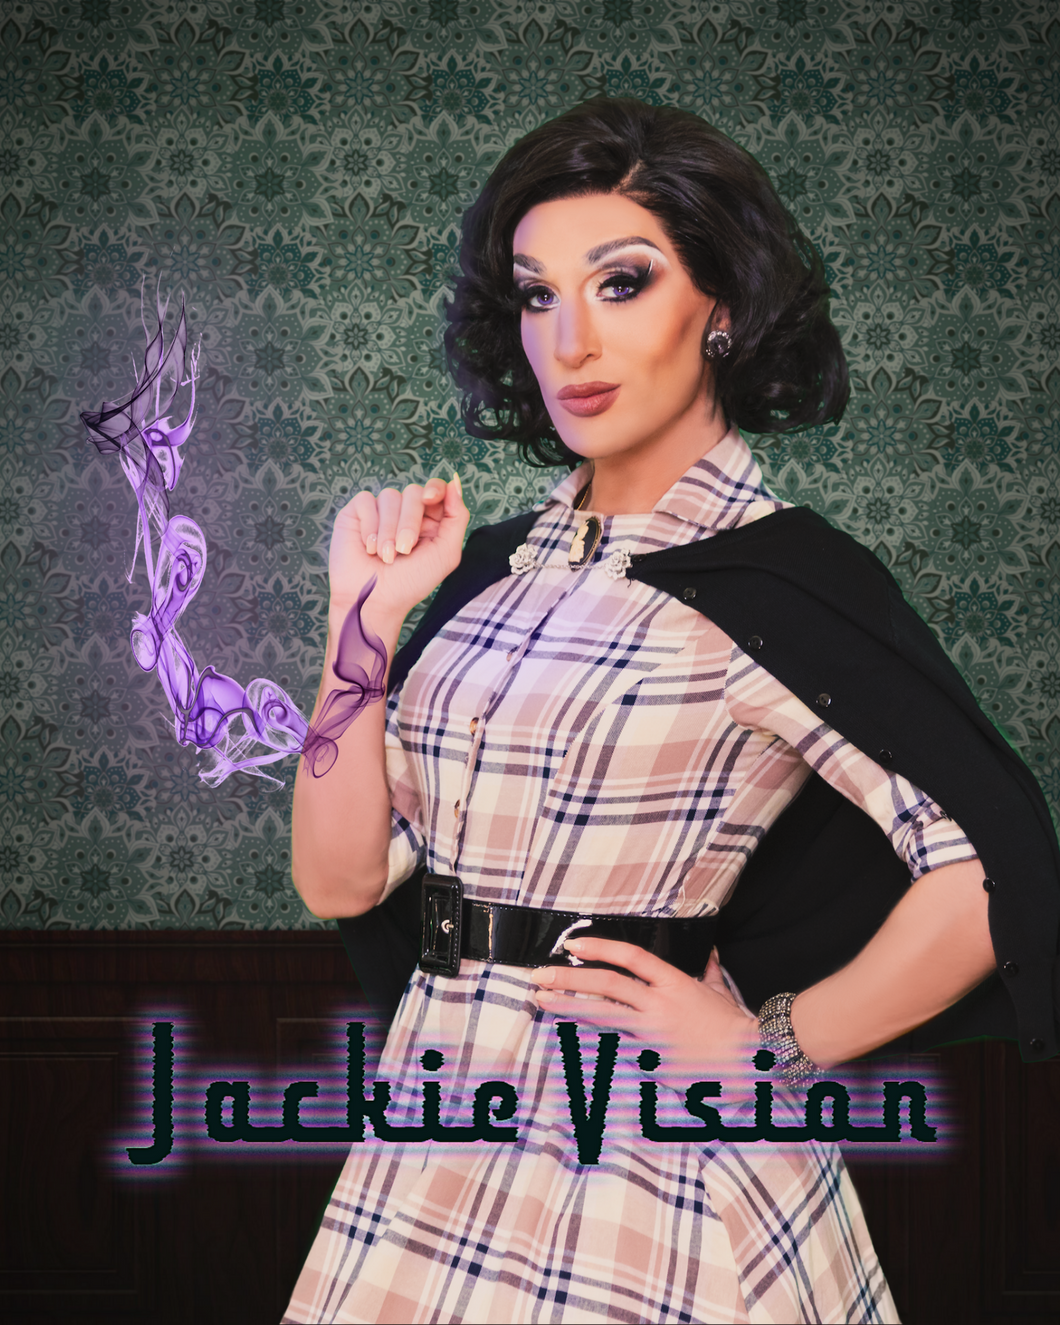 JackieVision Signed Print